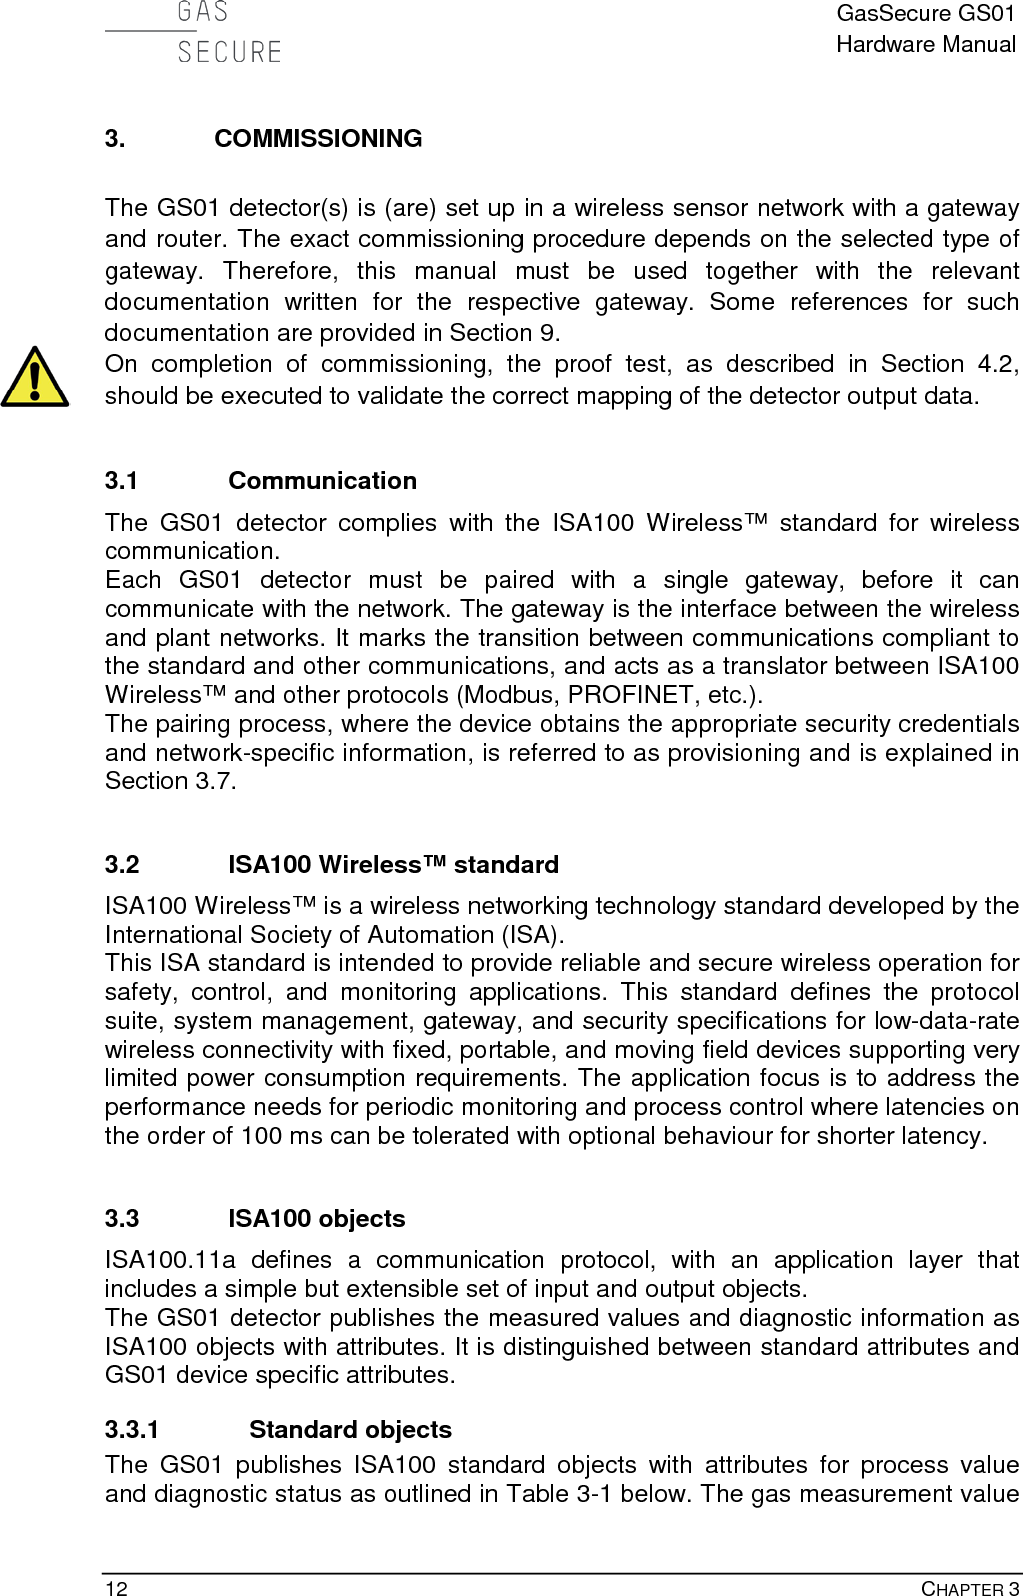  GasSecure GS01 Hardware Manual  12    CHAPTER 3 3. COMMISSIONING  The GS01 detector(s) is (are) set up in a wireless sensor network with a gateway and router. The exact commissioning procedure depends on the selected type of gateway.  Therefore, this manual must be used together with the  relevant documentation written for the respective  gateway.  Some  references for such documentation are provided in Section 9. On completion of commissioning, the proof test, as described in Section 4.2, should be executed to validate the correct mapping of the detector output data.  3.1 Communication The GS01 detector complies with the ISA100 Wireless™  standard for wireless communication. Each GS01 detector must be paired with a single gateway, before it can communicate with the network. The gateway is the interface between the wireless and plant networks. It marks the transition between communications compliant to the standard and other communications, and acts as a translator between ISA100 Wireless™ and other protocols (Modbus, PROFINET, etc.). The pairing process, where the device obtains the appropriate security credentials and network-specific information, is referred to as provisioning and is explained in Section 3.7.  3.2 ISA100 Wireless™ standard ISA100 Wireless™ is a wireless networking technology standard developed by the International Society of Automation (ISA). This ISA standard is intended to provide reliable and secure wireless operation for safety, control, and monitoring applications. This standard defines the protocol suite, system management, gateway, and security specifications for low-data-rate wireless connectivity with fixed, portable, and moving field devices supporting very limited power consumption requirements. The application focus is to address the performance needs for periodic monitoring and process control where latencies on the order of 100 ms can be tolerated with optional behaviour for shorter latency.  3.3 ISA100 objects ISA100.11a defines a communication protocol, with an application layer that includes a simple but extensible set of input and output objects.  The GS01 detector publishes the measured values and diagnostic information as ISA100 objects with attributes. It is distinguished between standard attributes and GS01 device specific attributes. 3.3.1 Standard objects The  GS01 publishes ISA100  standard objects with attributes for process value and diagnostic status as outlined in Table 3-1 below. The gas measurement value 